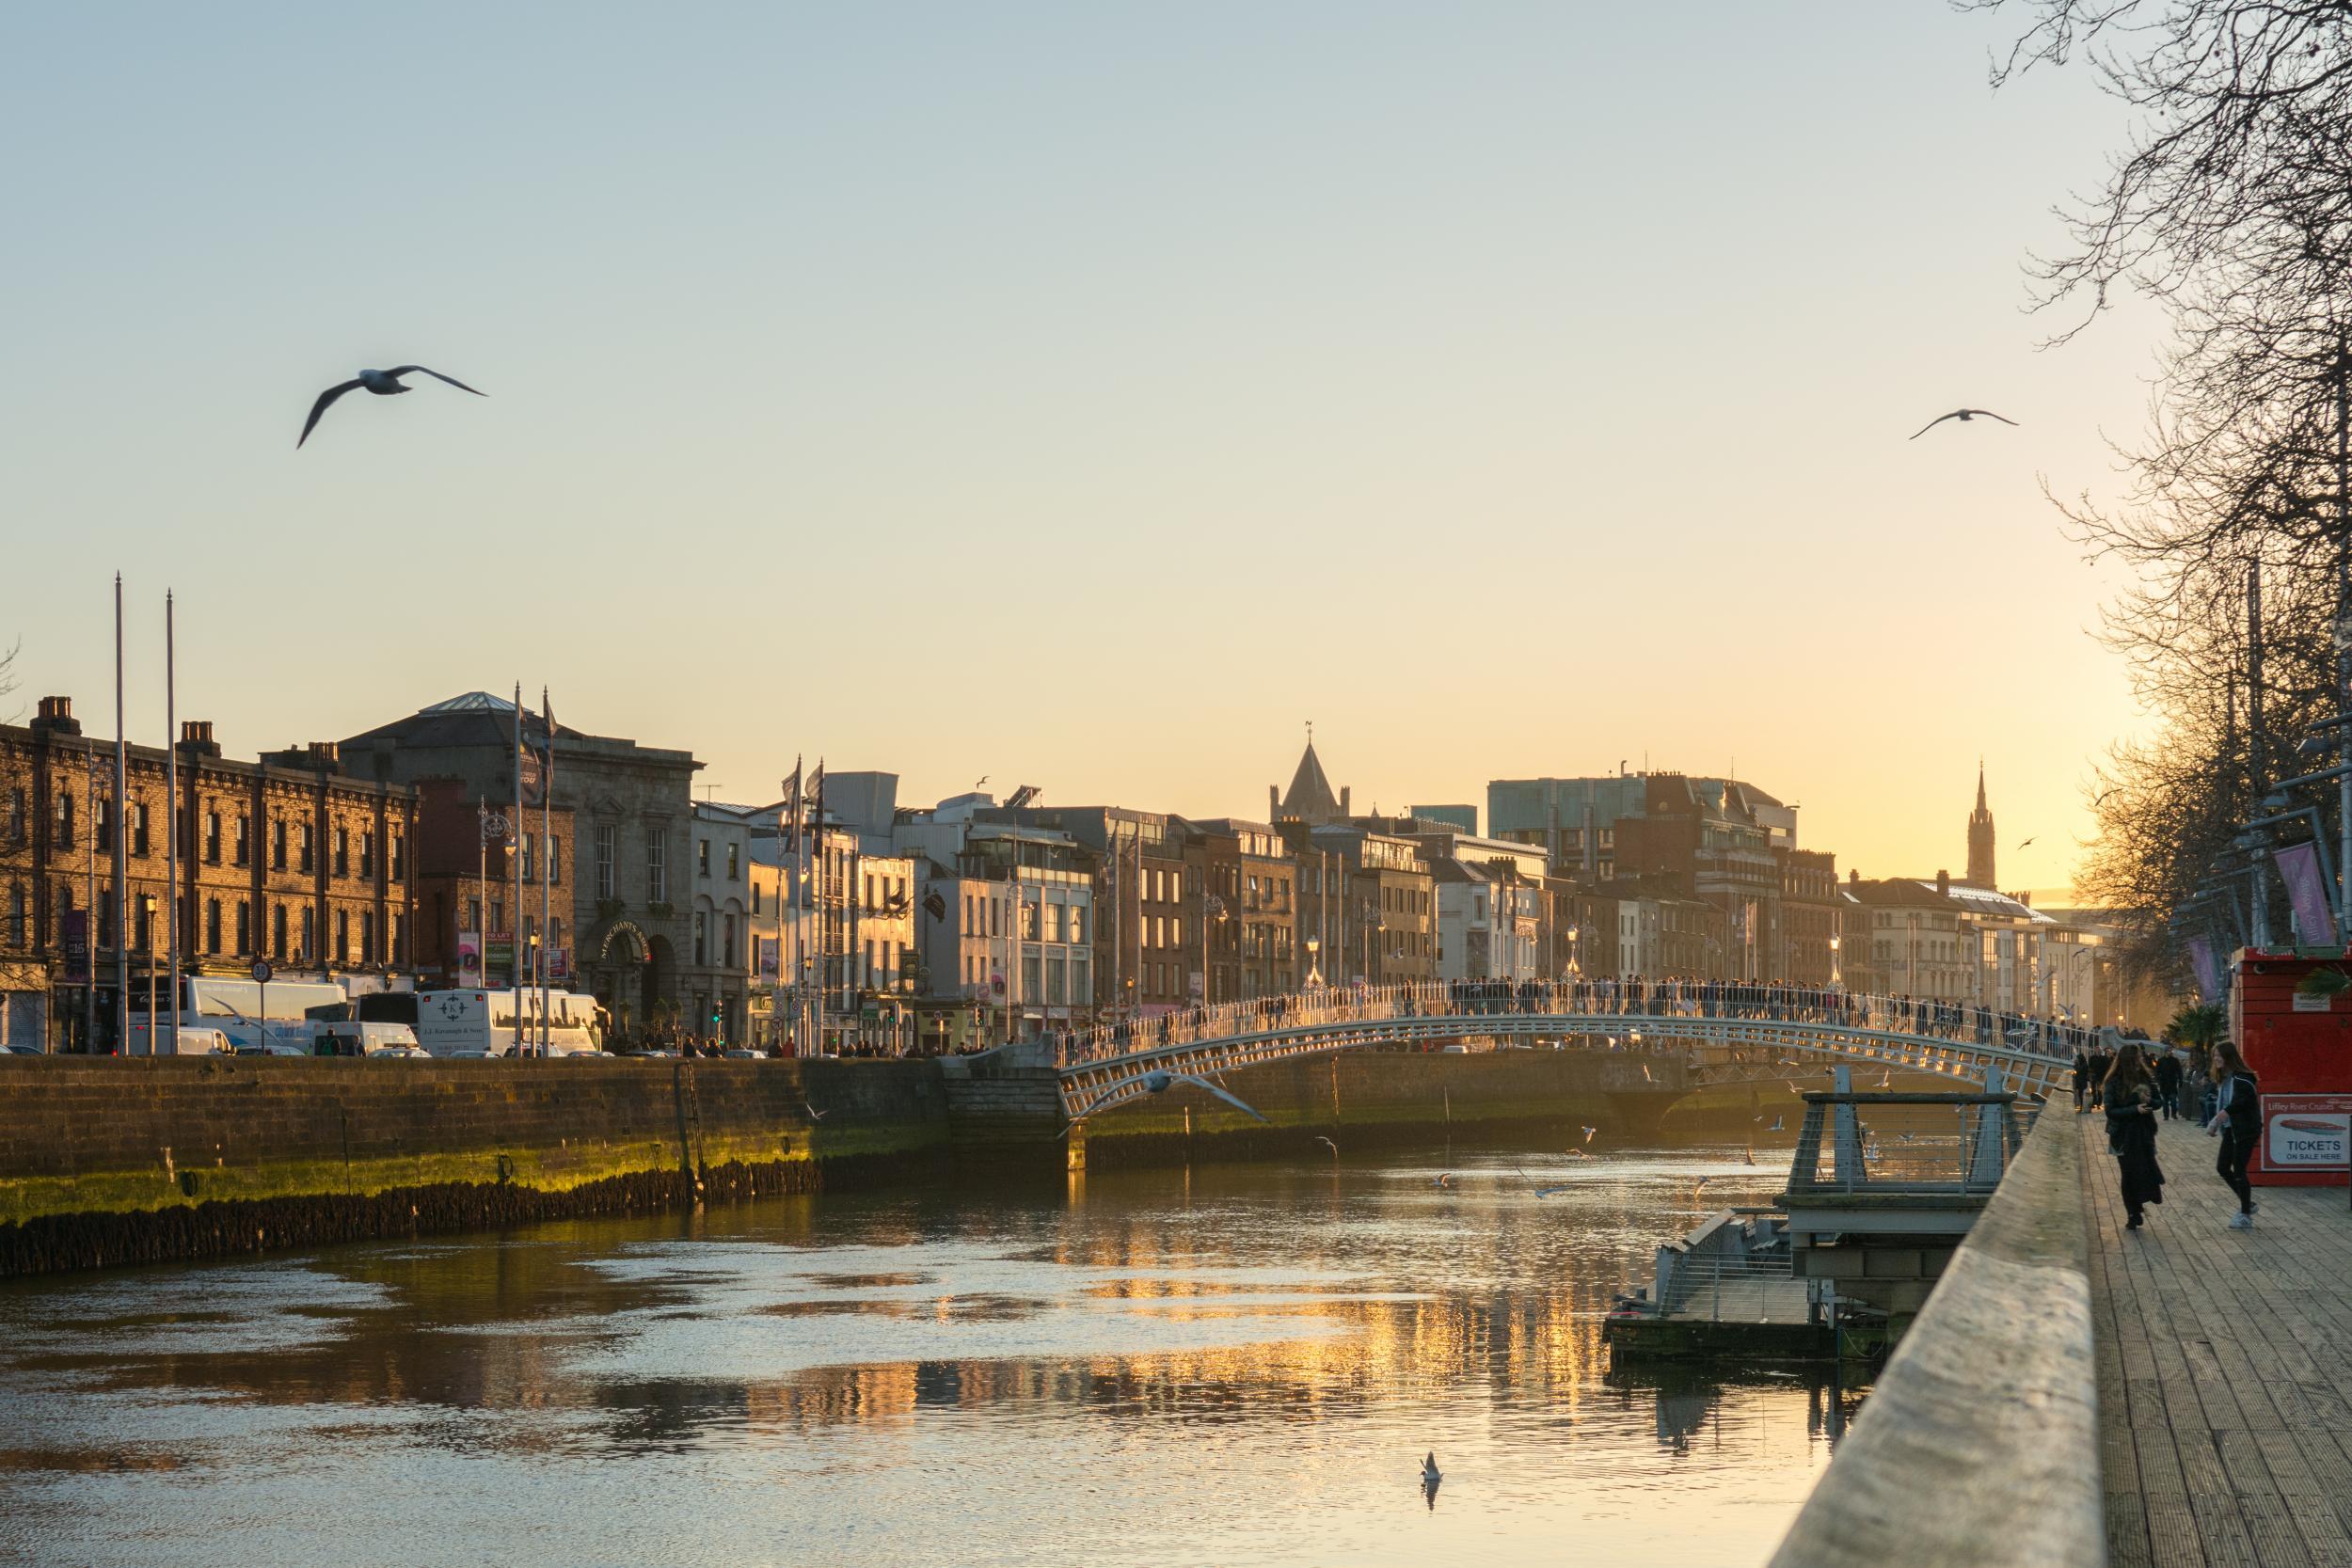 The sun sets over the River Liffey in Dublin, a city with plenty of scenic waterside activities to enjoy